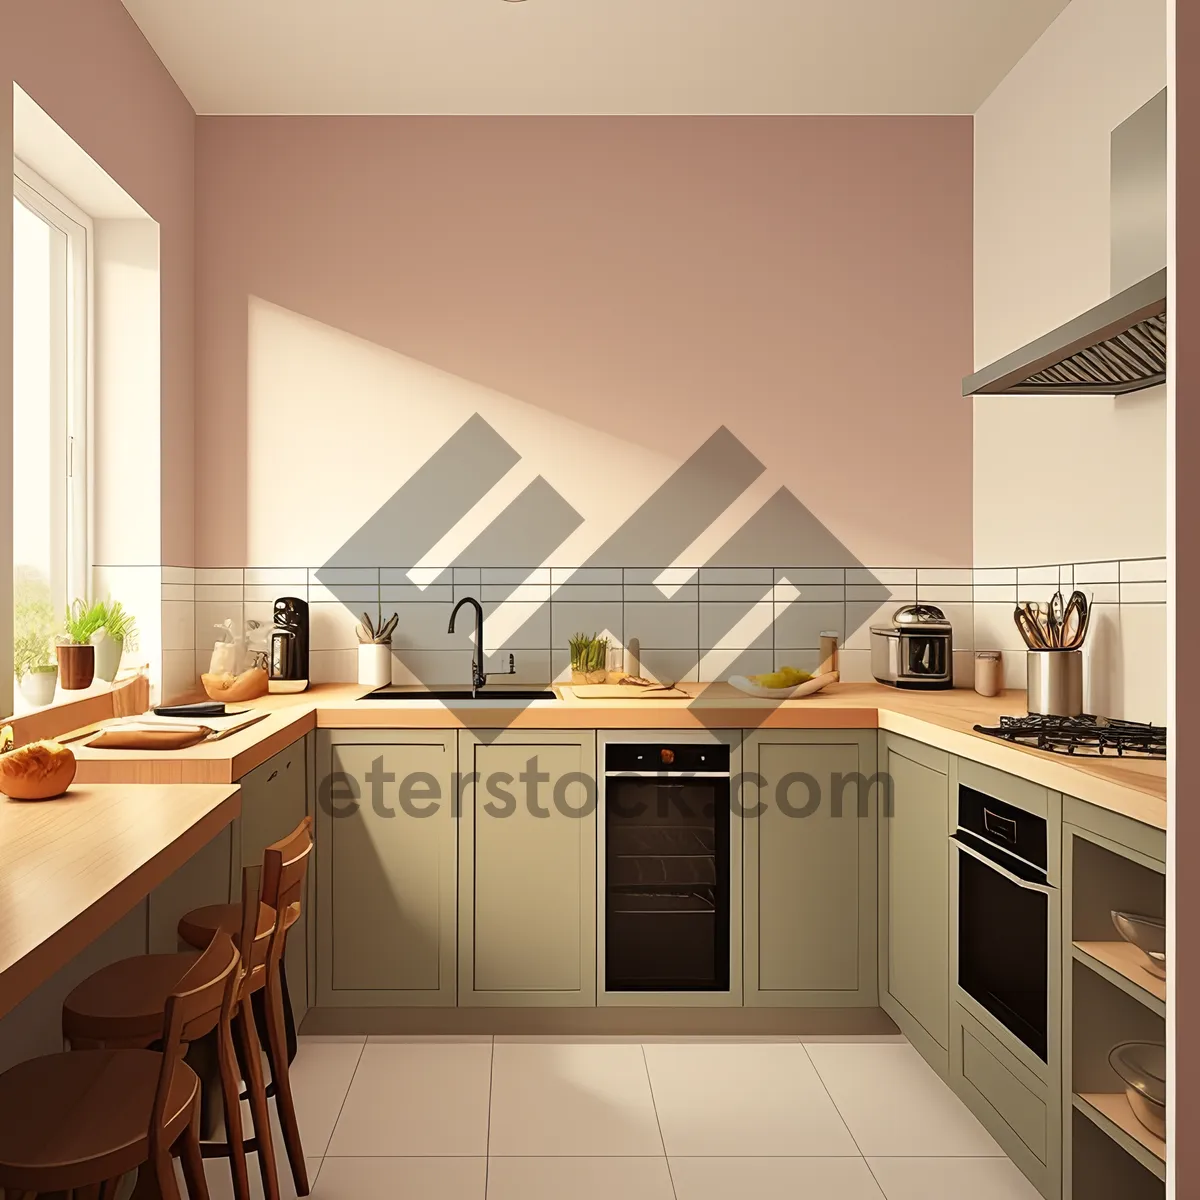 Picture of Modern Kitchen Interior Decorated with Trendy Furniture